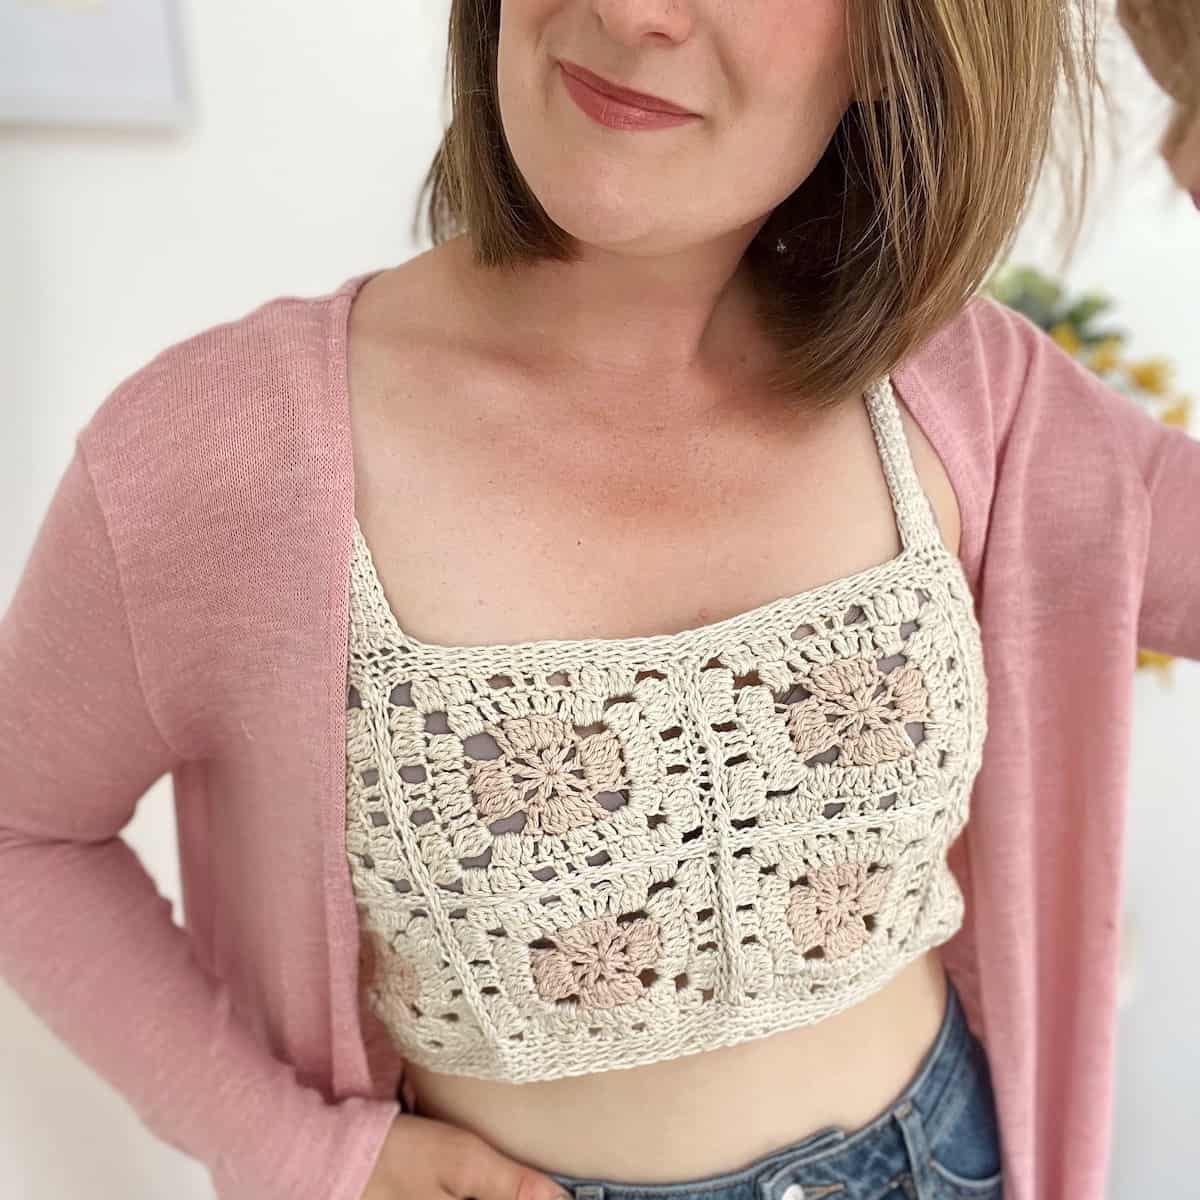 Bra Size Guide and Crochet Tops Free Patterns